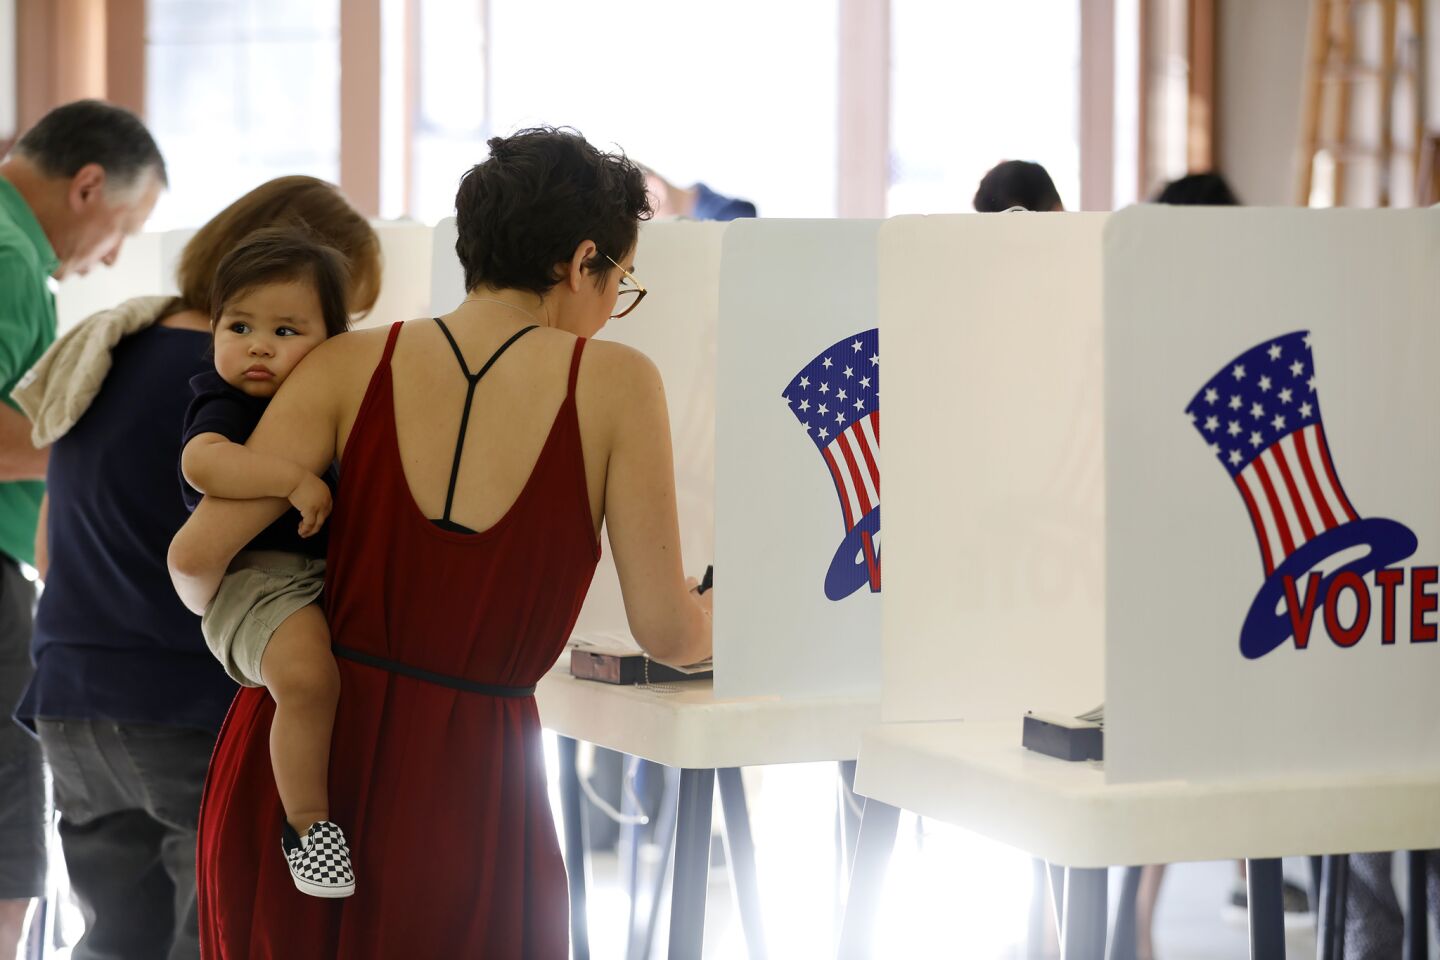 Rachel Mesa, 29, holds her son Madison Mesa, 1, as she votes at a polling site Tuesday in Stevenson Ranch, Calif.